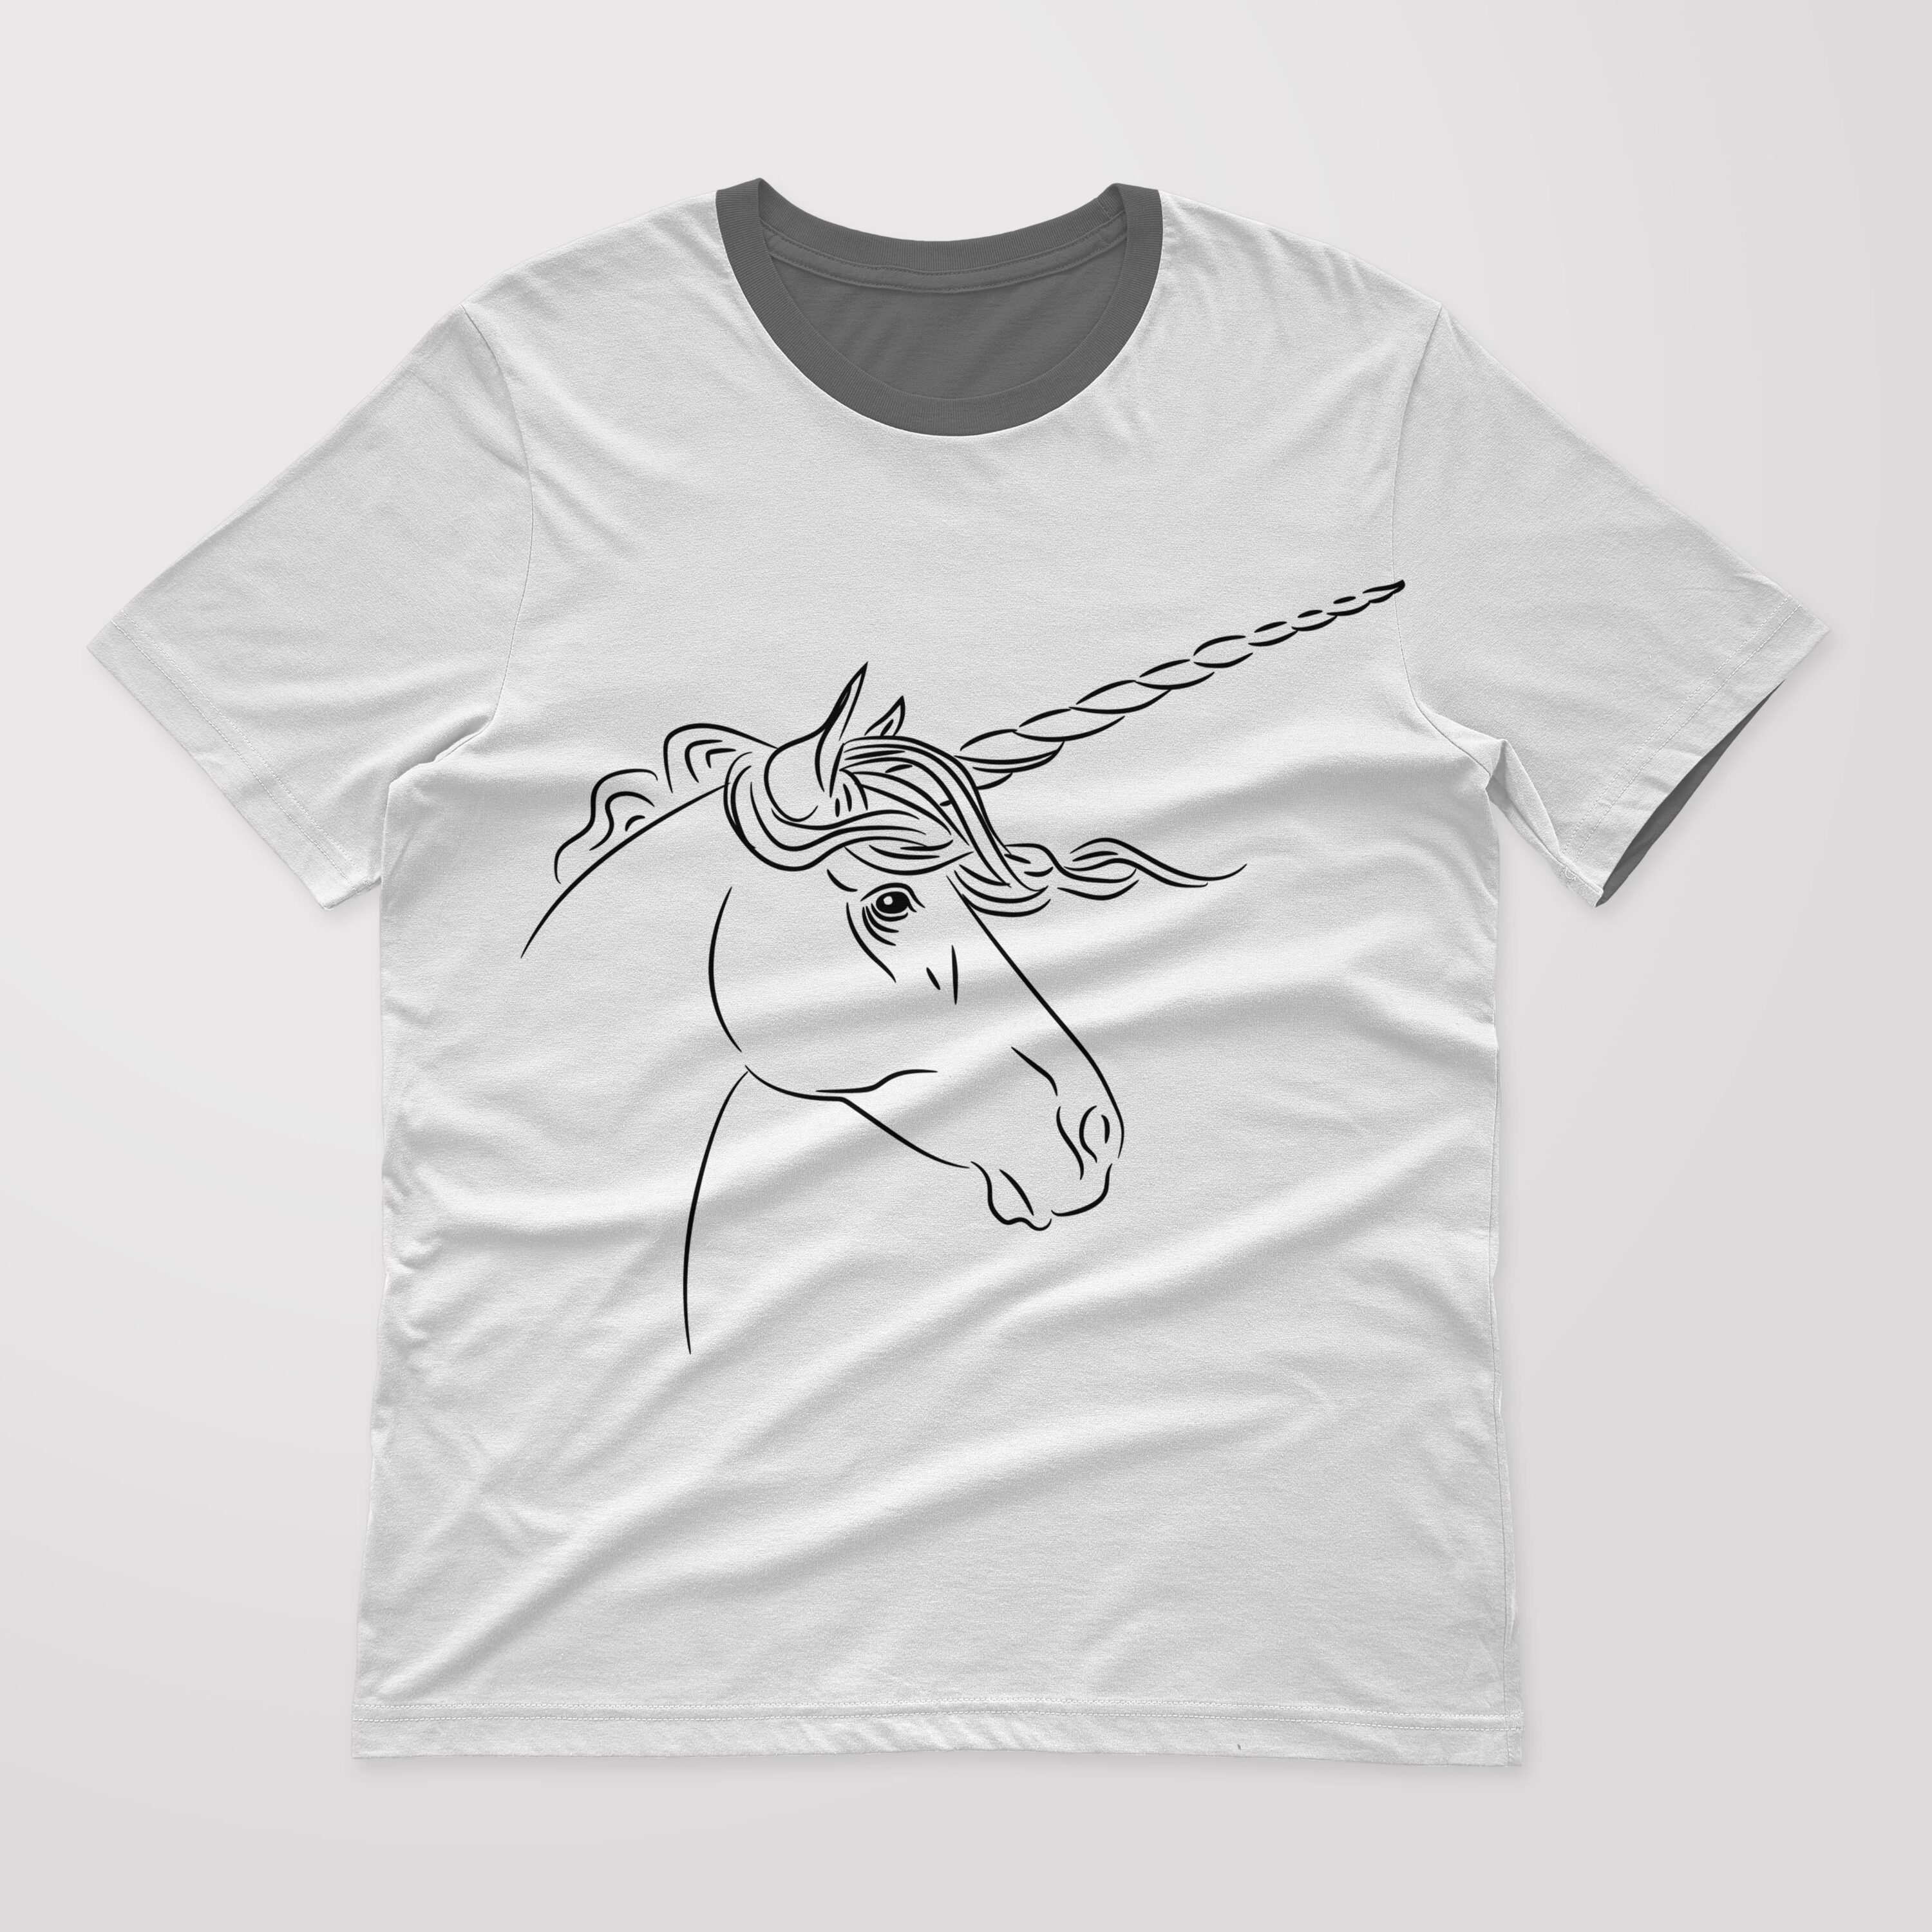 Gray t-shirt with a dark gray collar and a black unicorn head on a gray background.